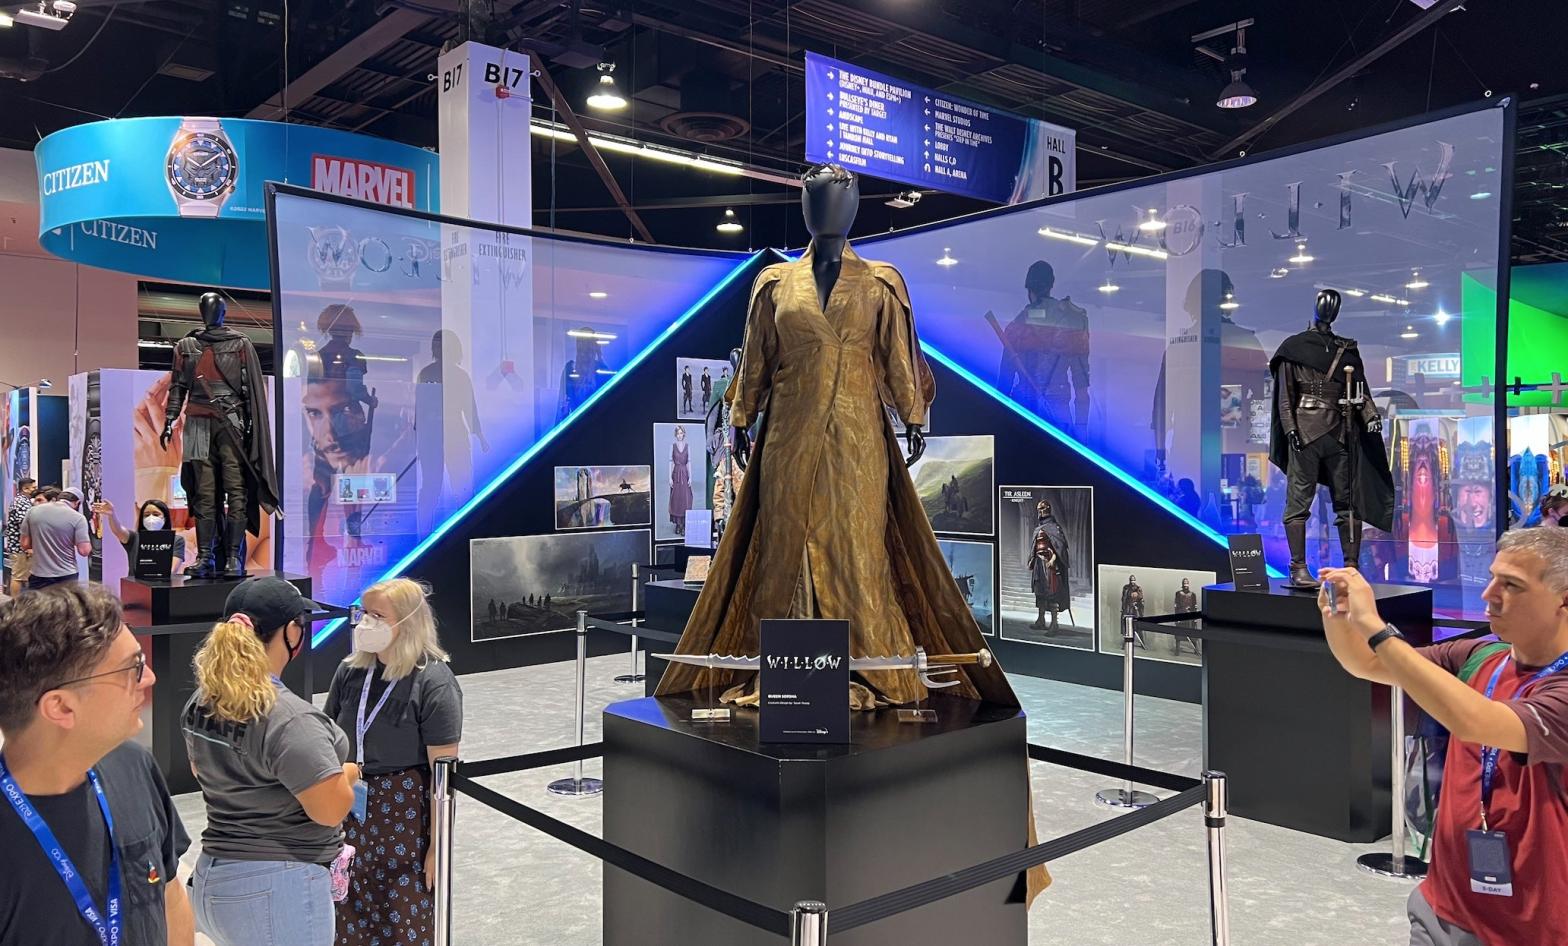 The Willow display at D23 Expo. Get a better look in this slideshow. (Image: Gizmodo/Germain Lussier)